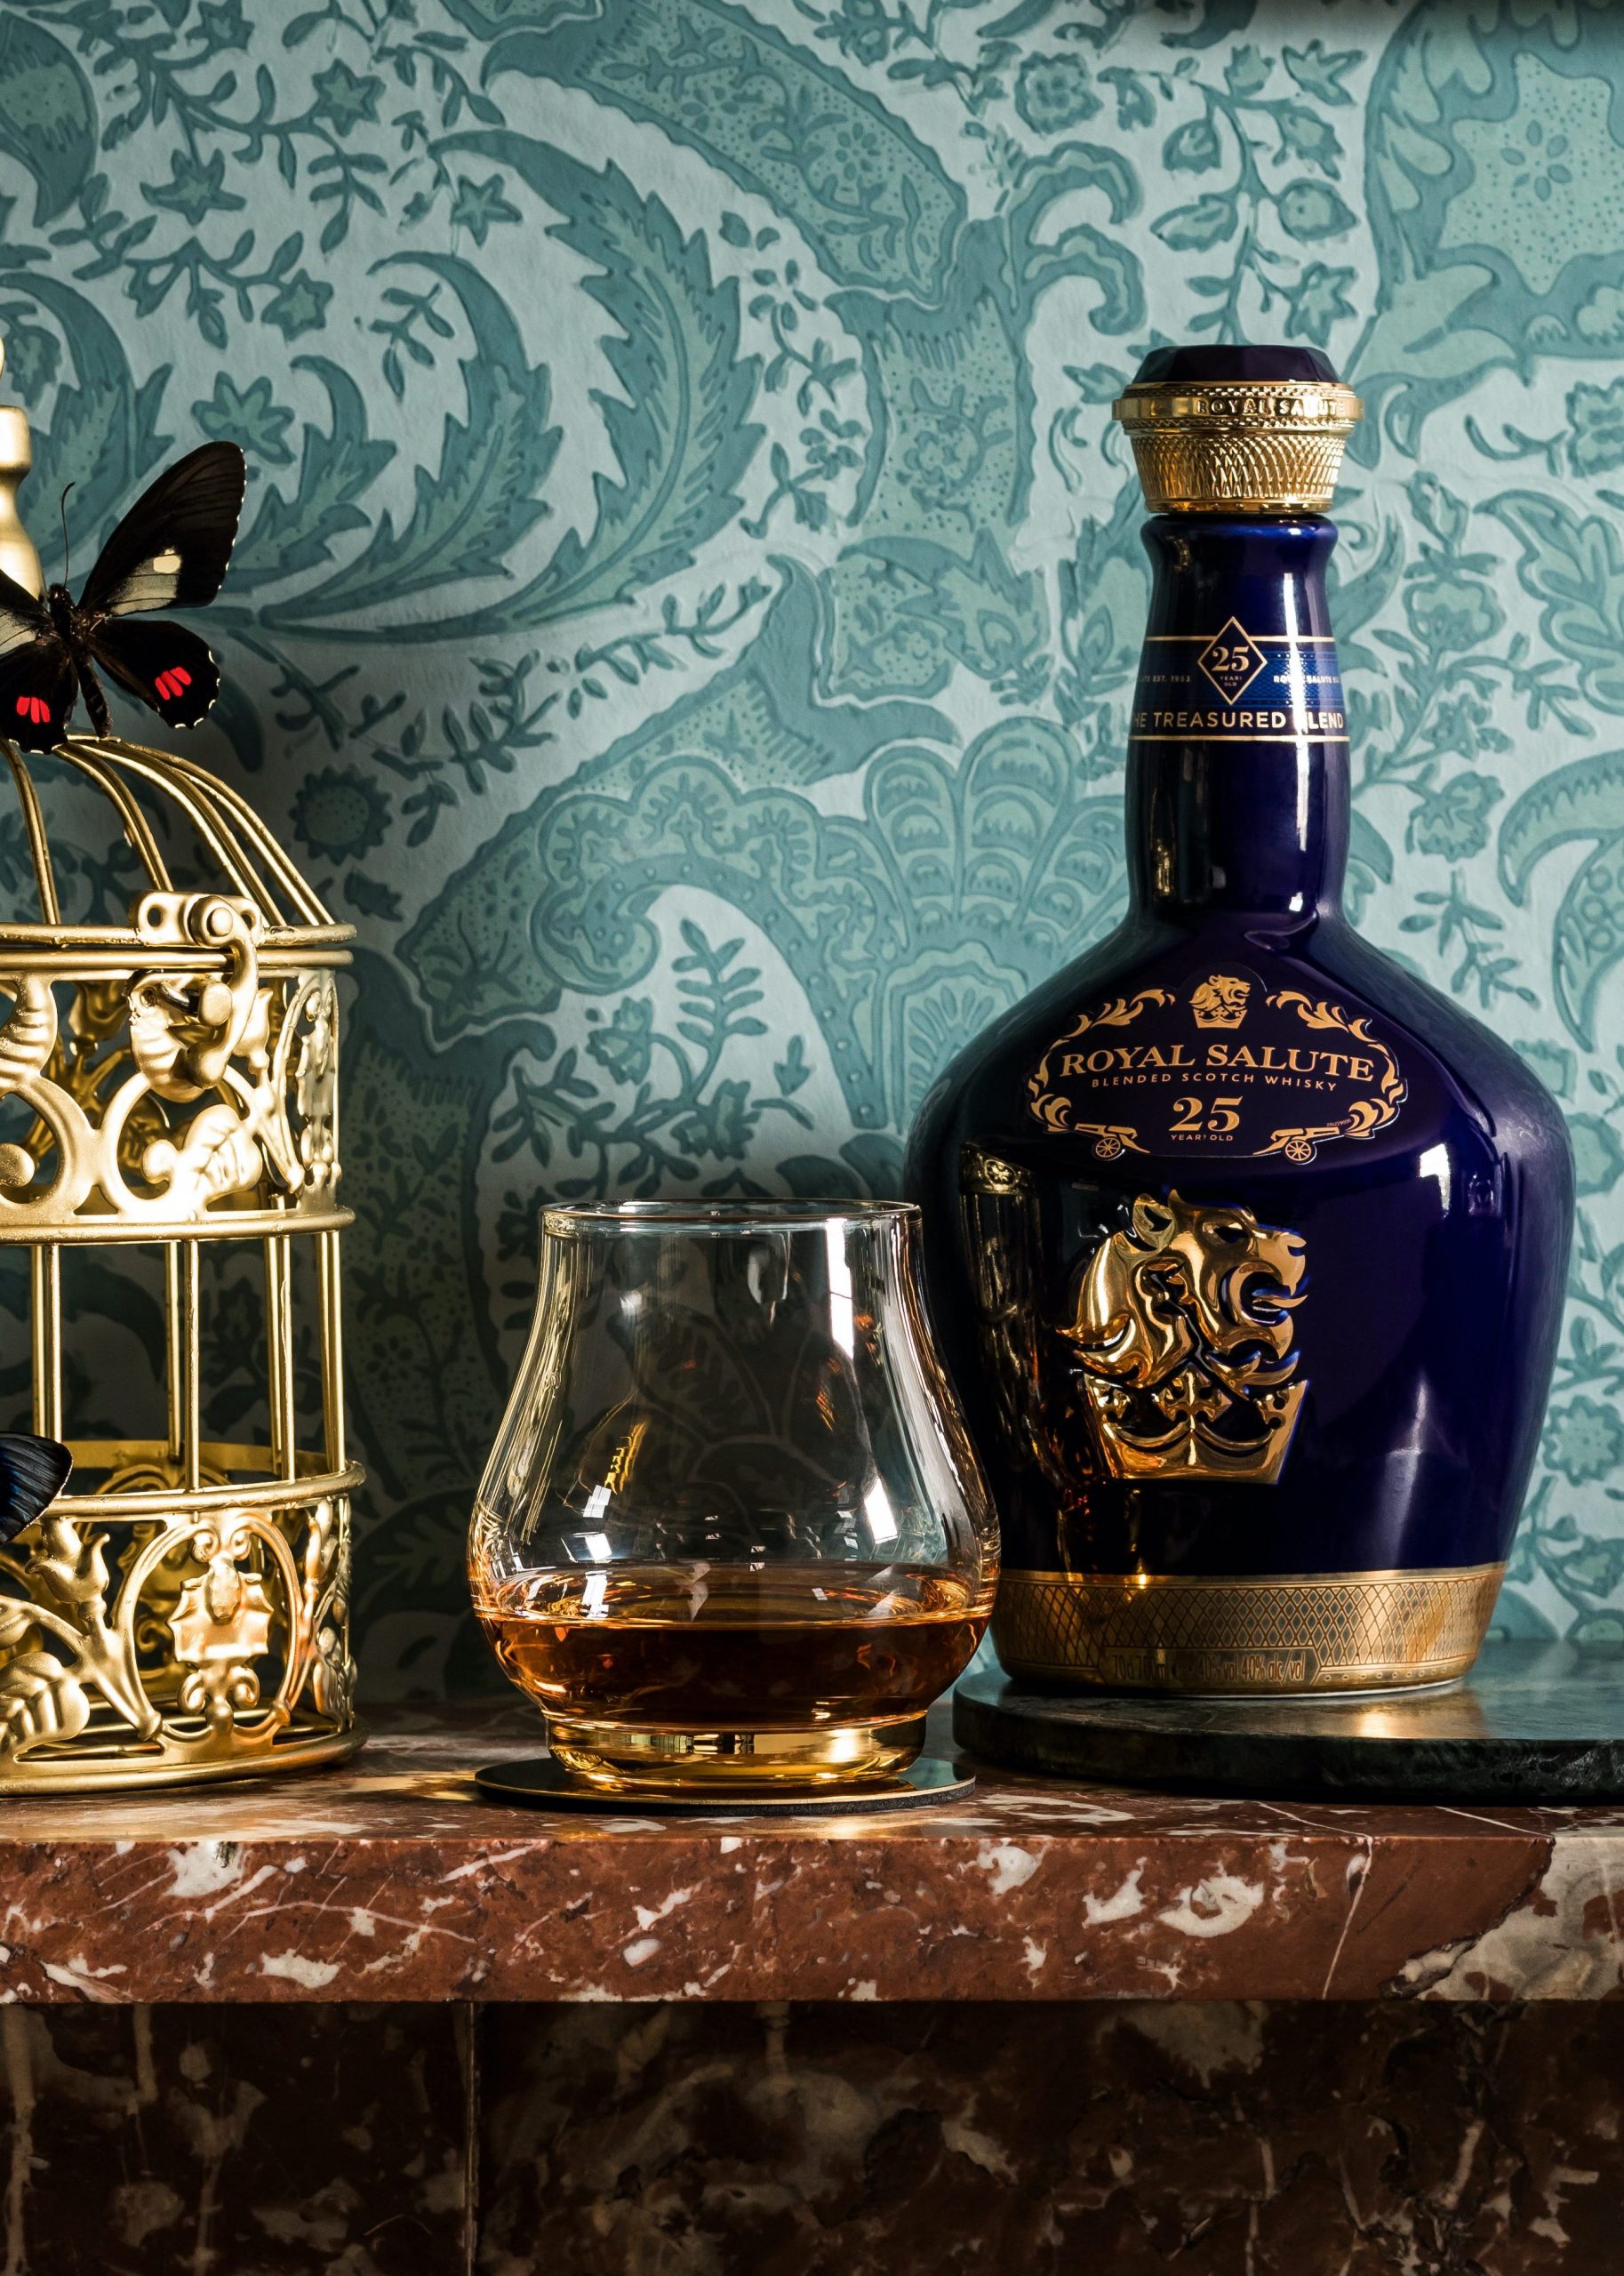 21 Year Old The Signature Blend - Royal Salute Scotch Whisky